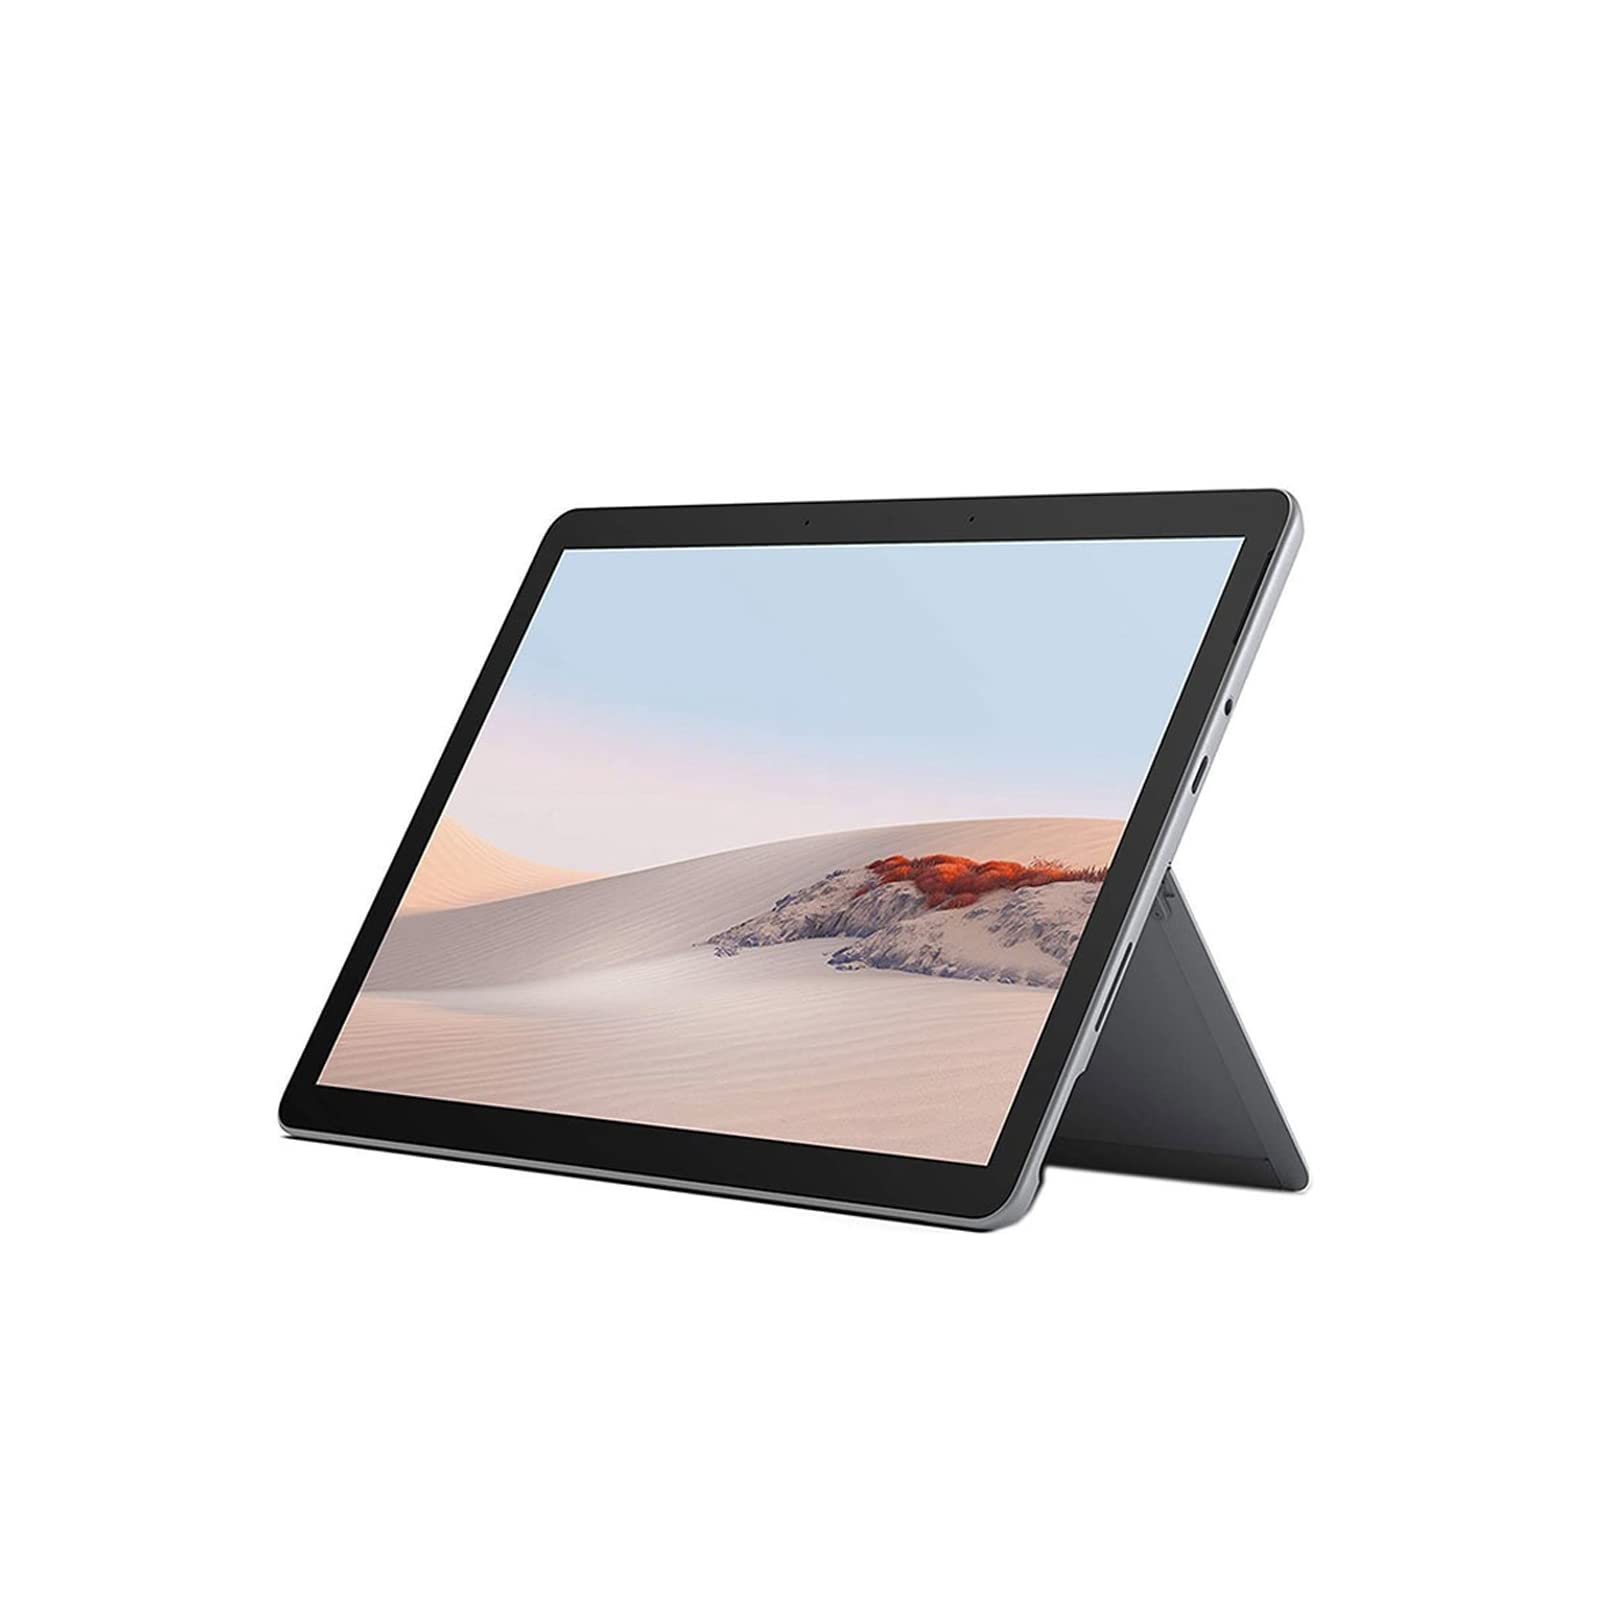 Microsoft Surface Go 2 10.5" 2-in-1 Tablet with 4G LTE Advanced, Intel Core m3 8100Y 1.1GHz, 8GB RAM, 256GB SSD, Windows 10 Pro, Silver